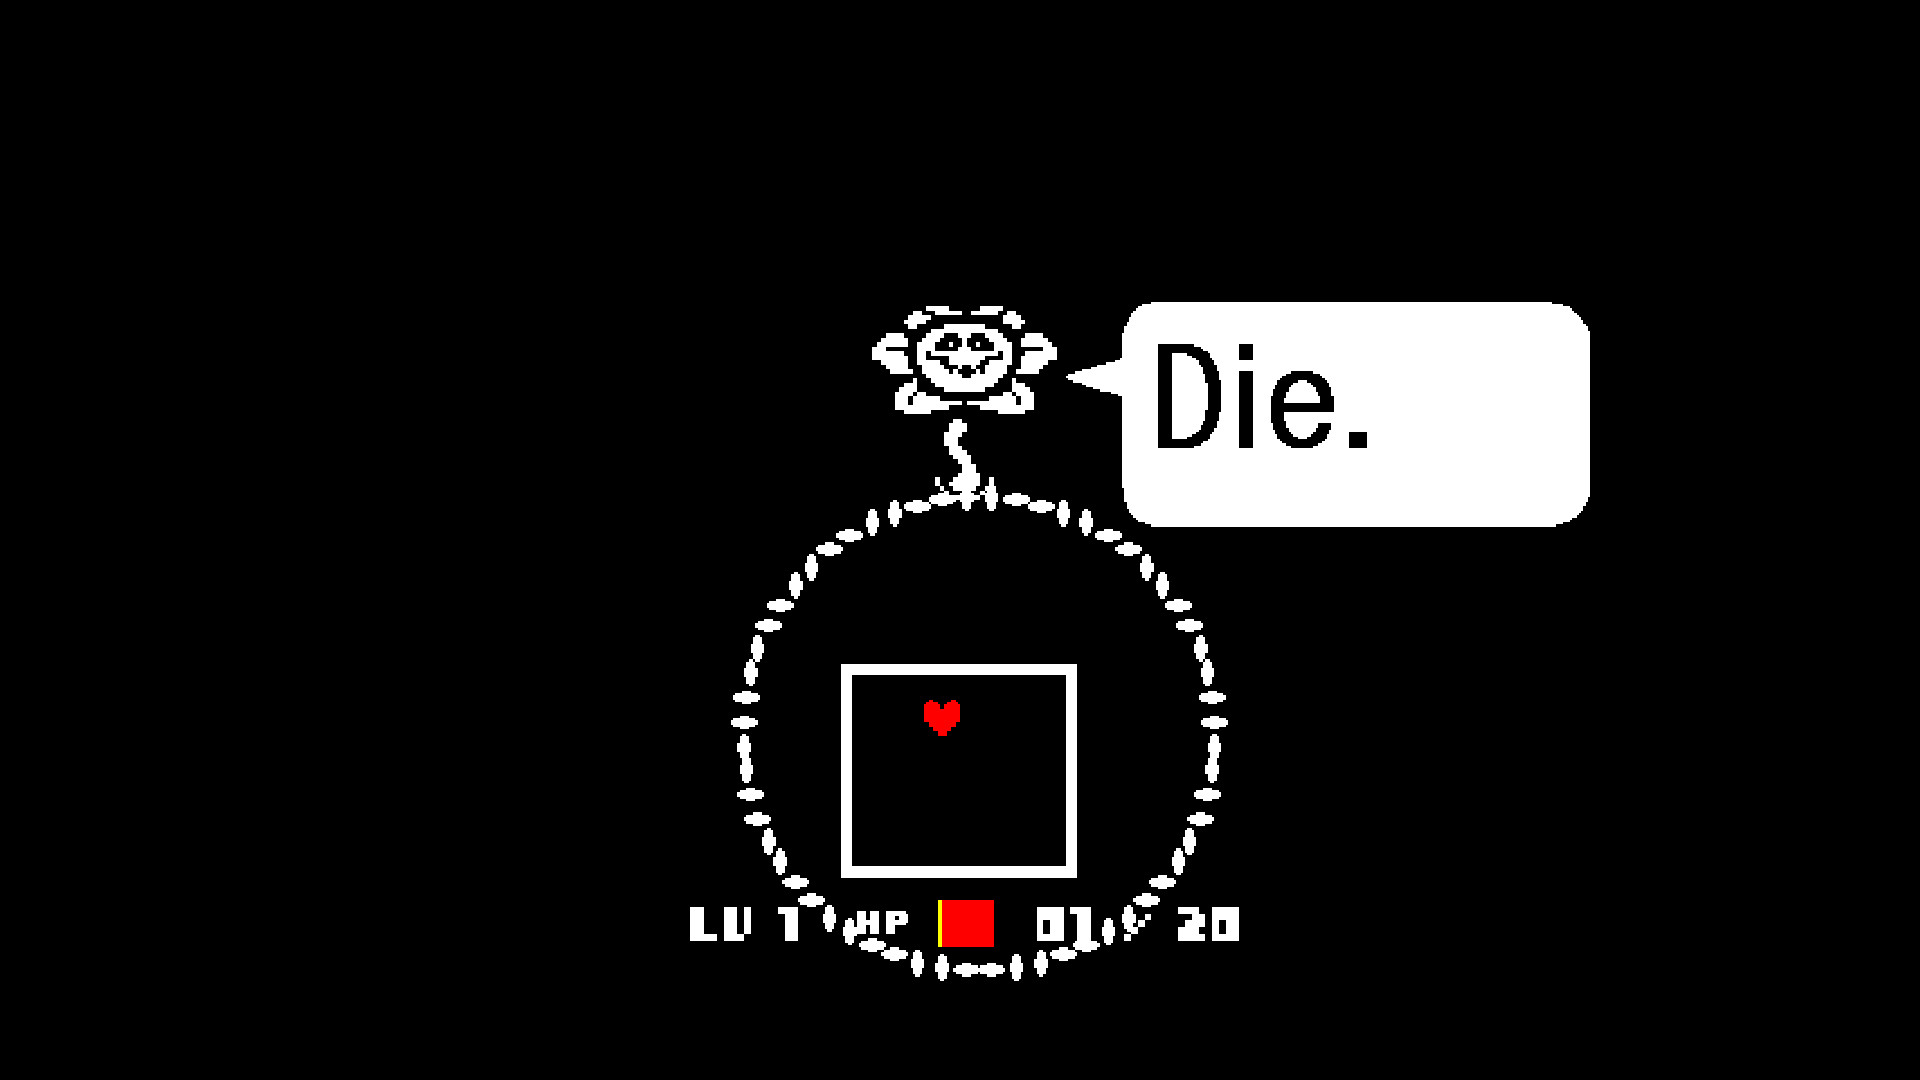 1920x1080 For some reason, Flowey knows how to speak in a different font other than  the usual Undertale font